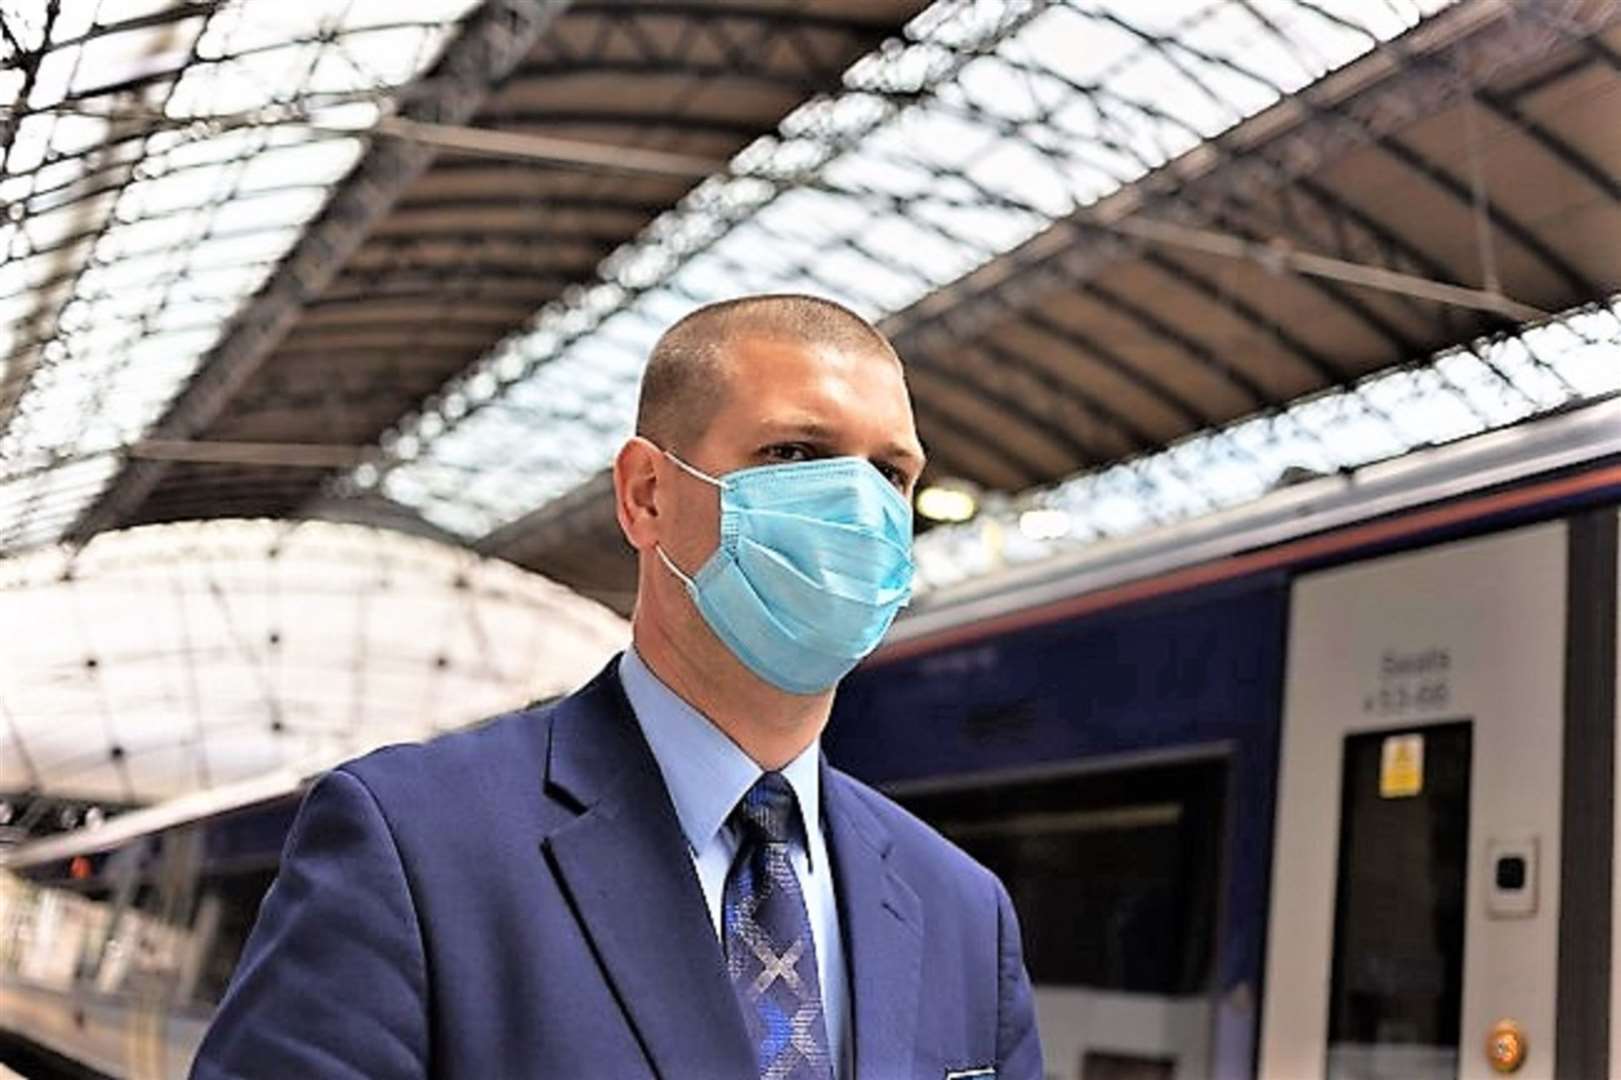 Wearing face masks is mandatory for staff and passengers.